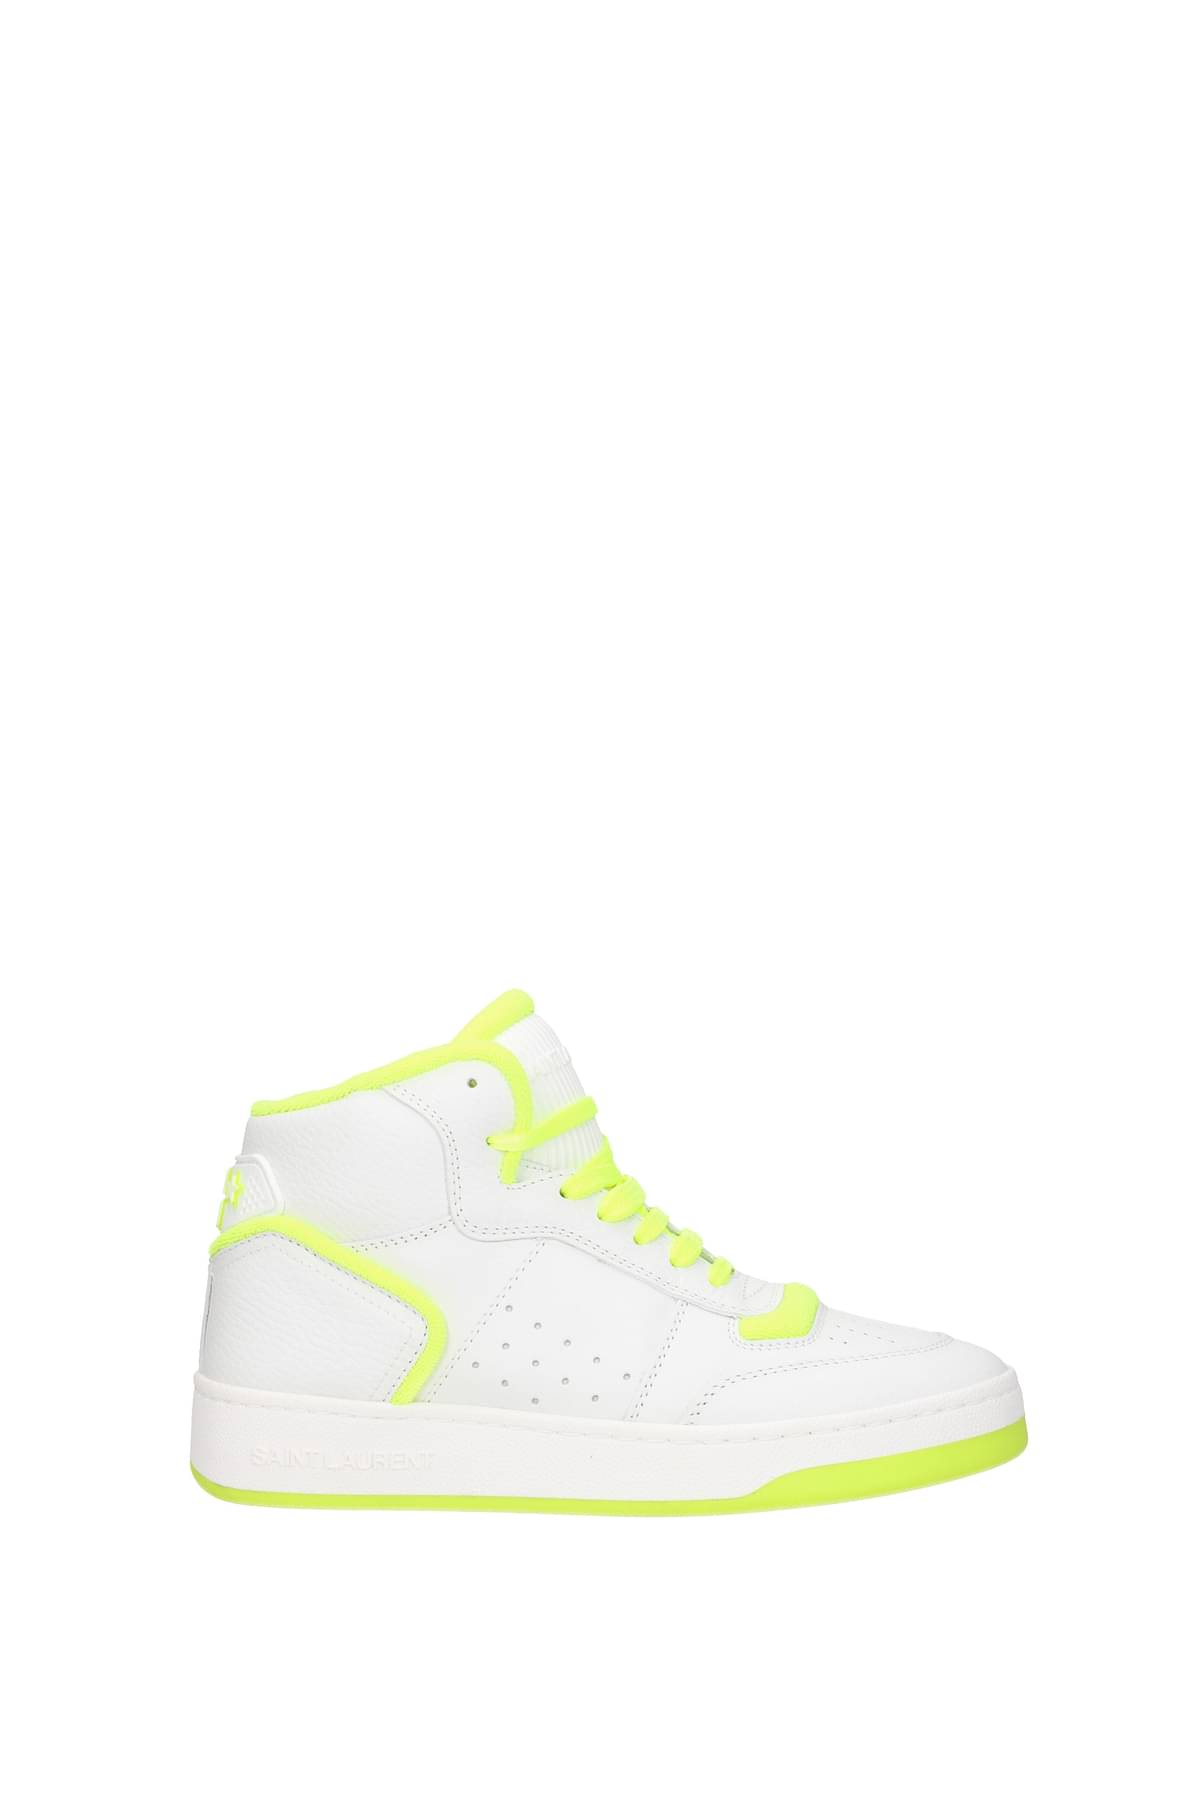 Saint Laurent Sneakers Women 713655AABPN9056 Leather White Fluo Yellow 620€